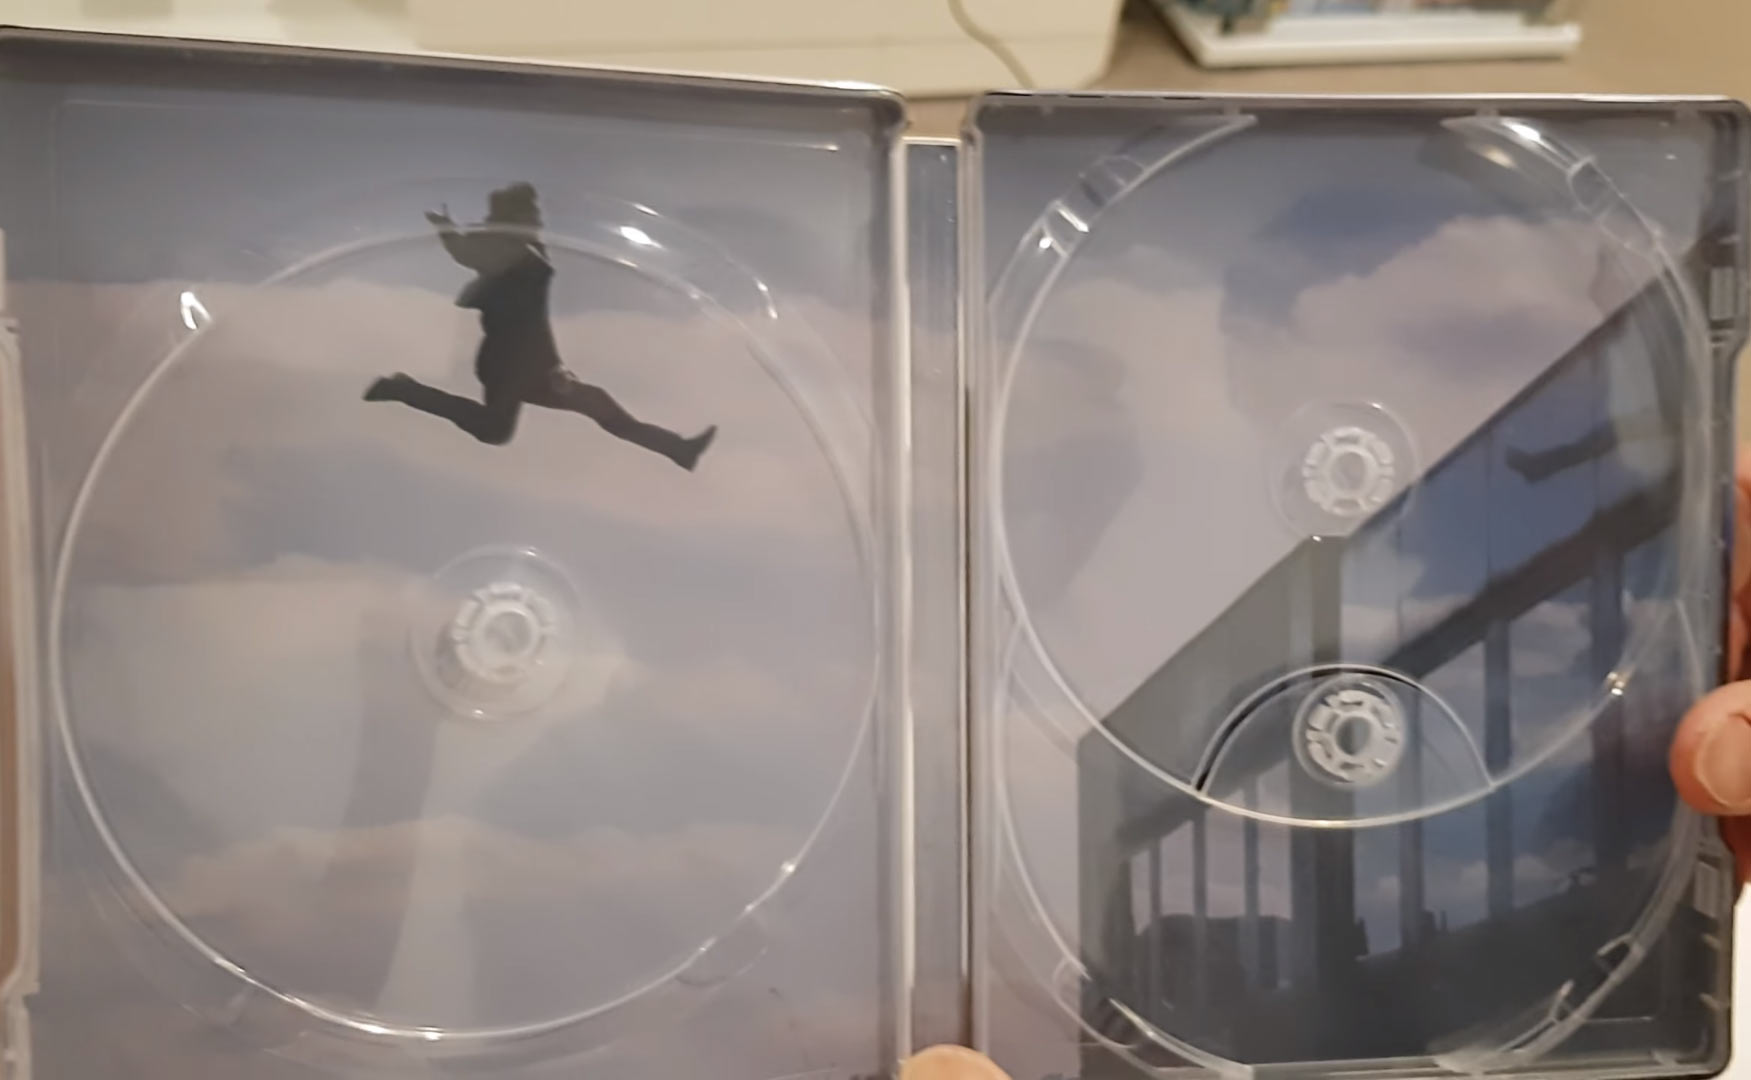 Mission-Impossible-Fallout-steelbook5.jpg